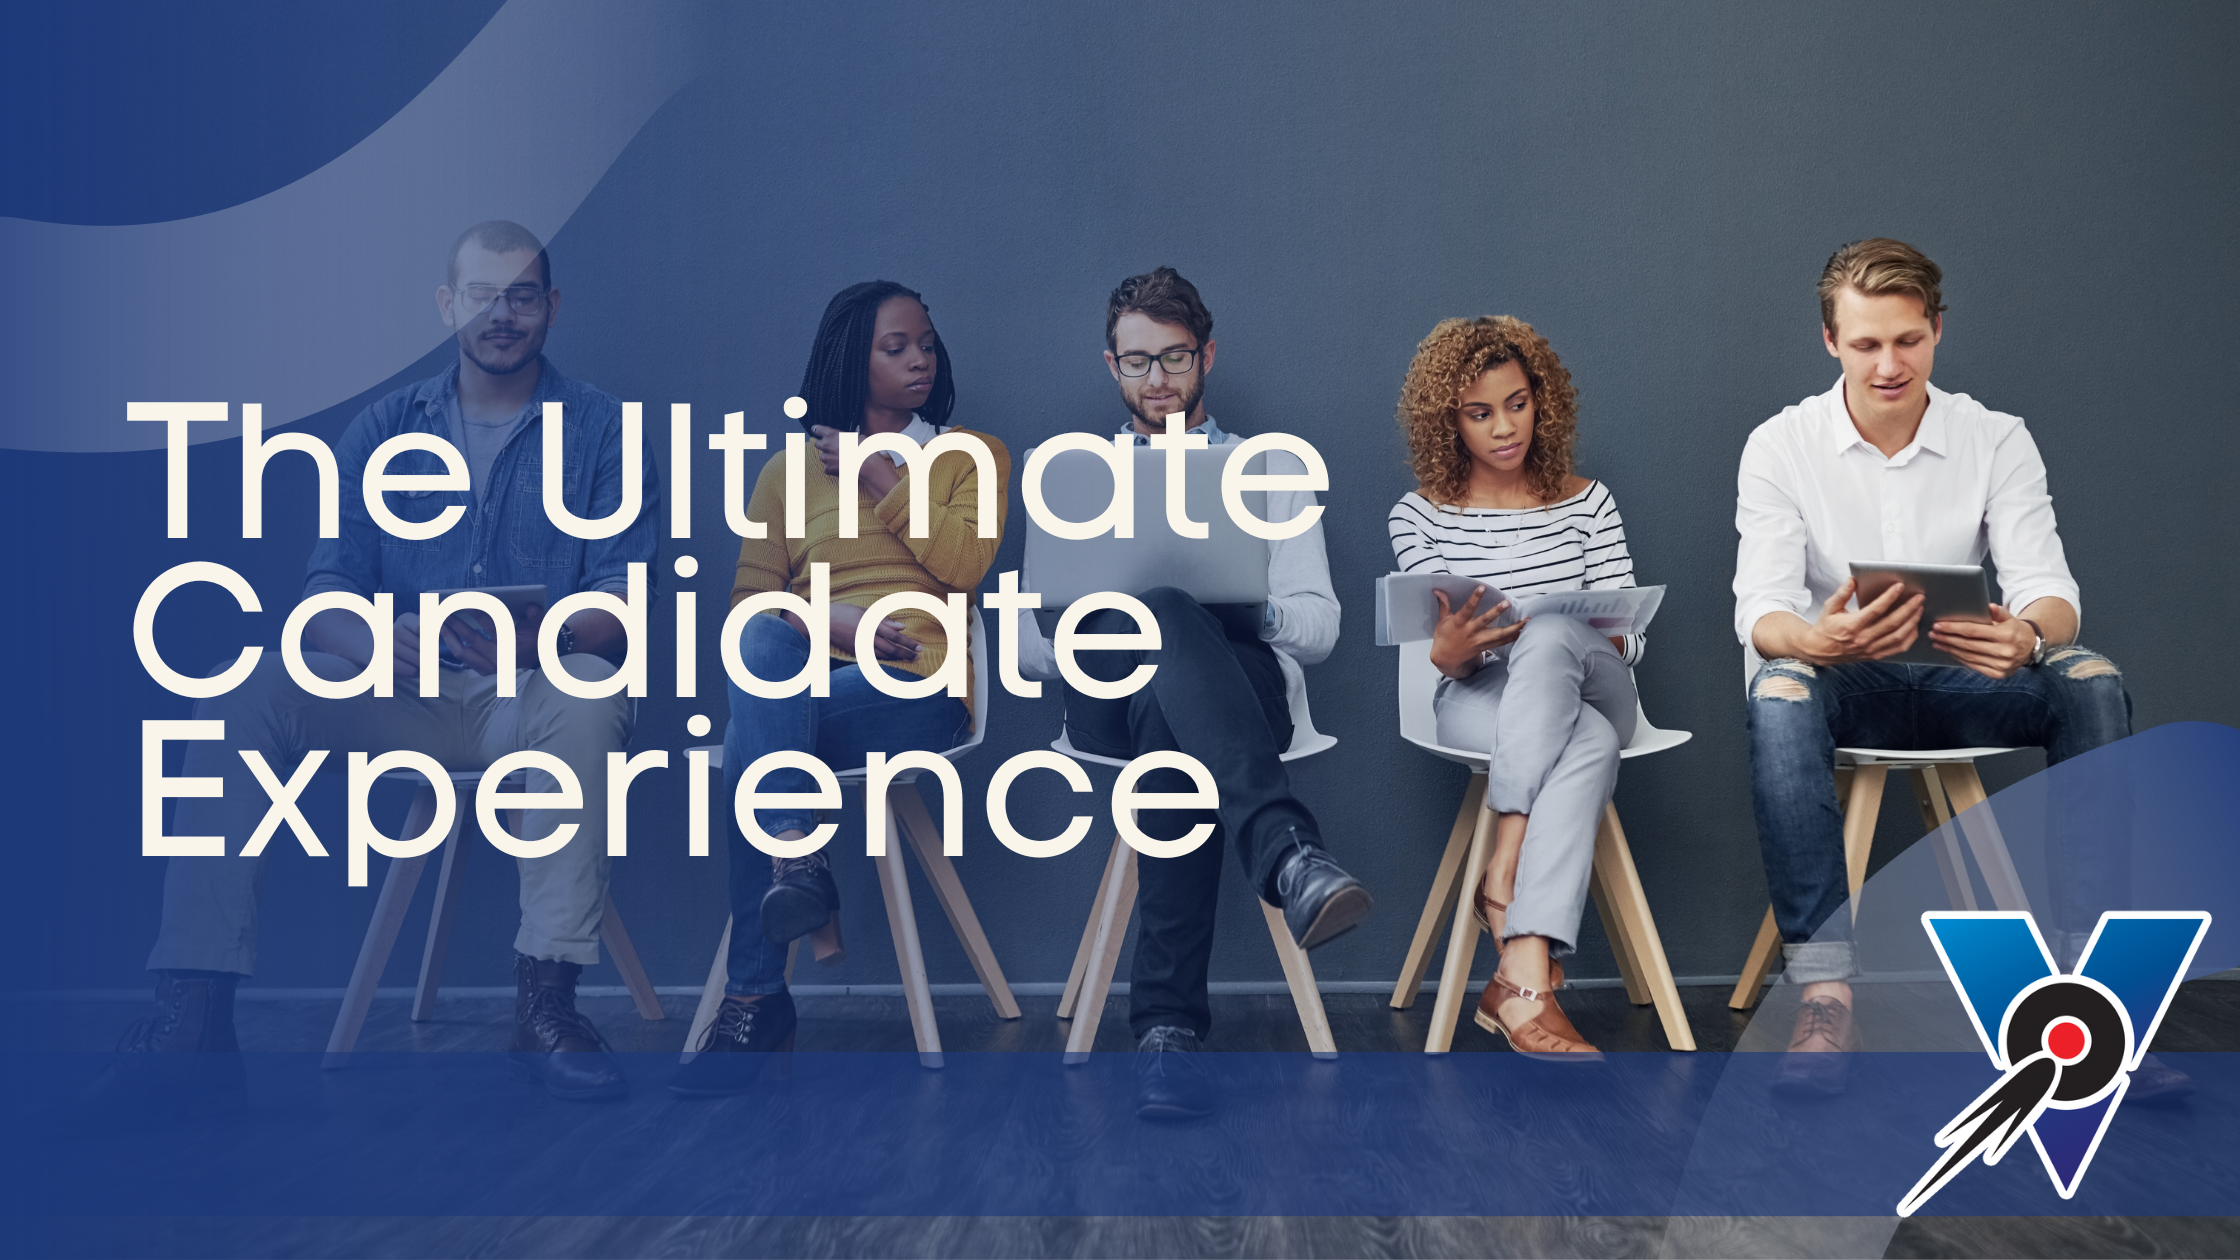 The Ultimate Candidate Experience